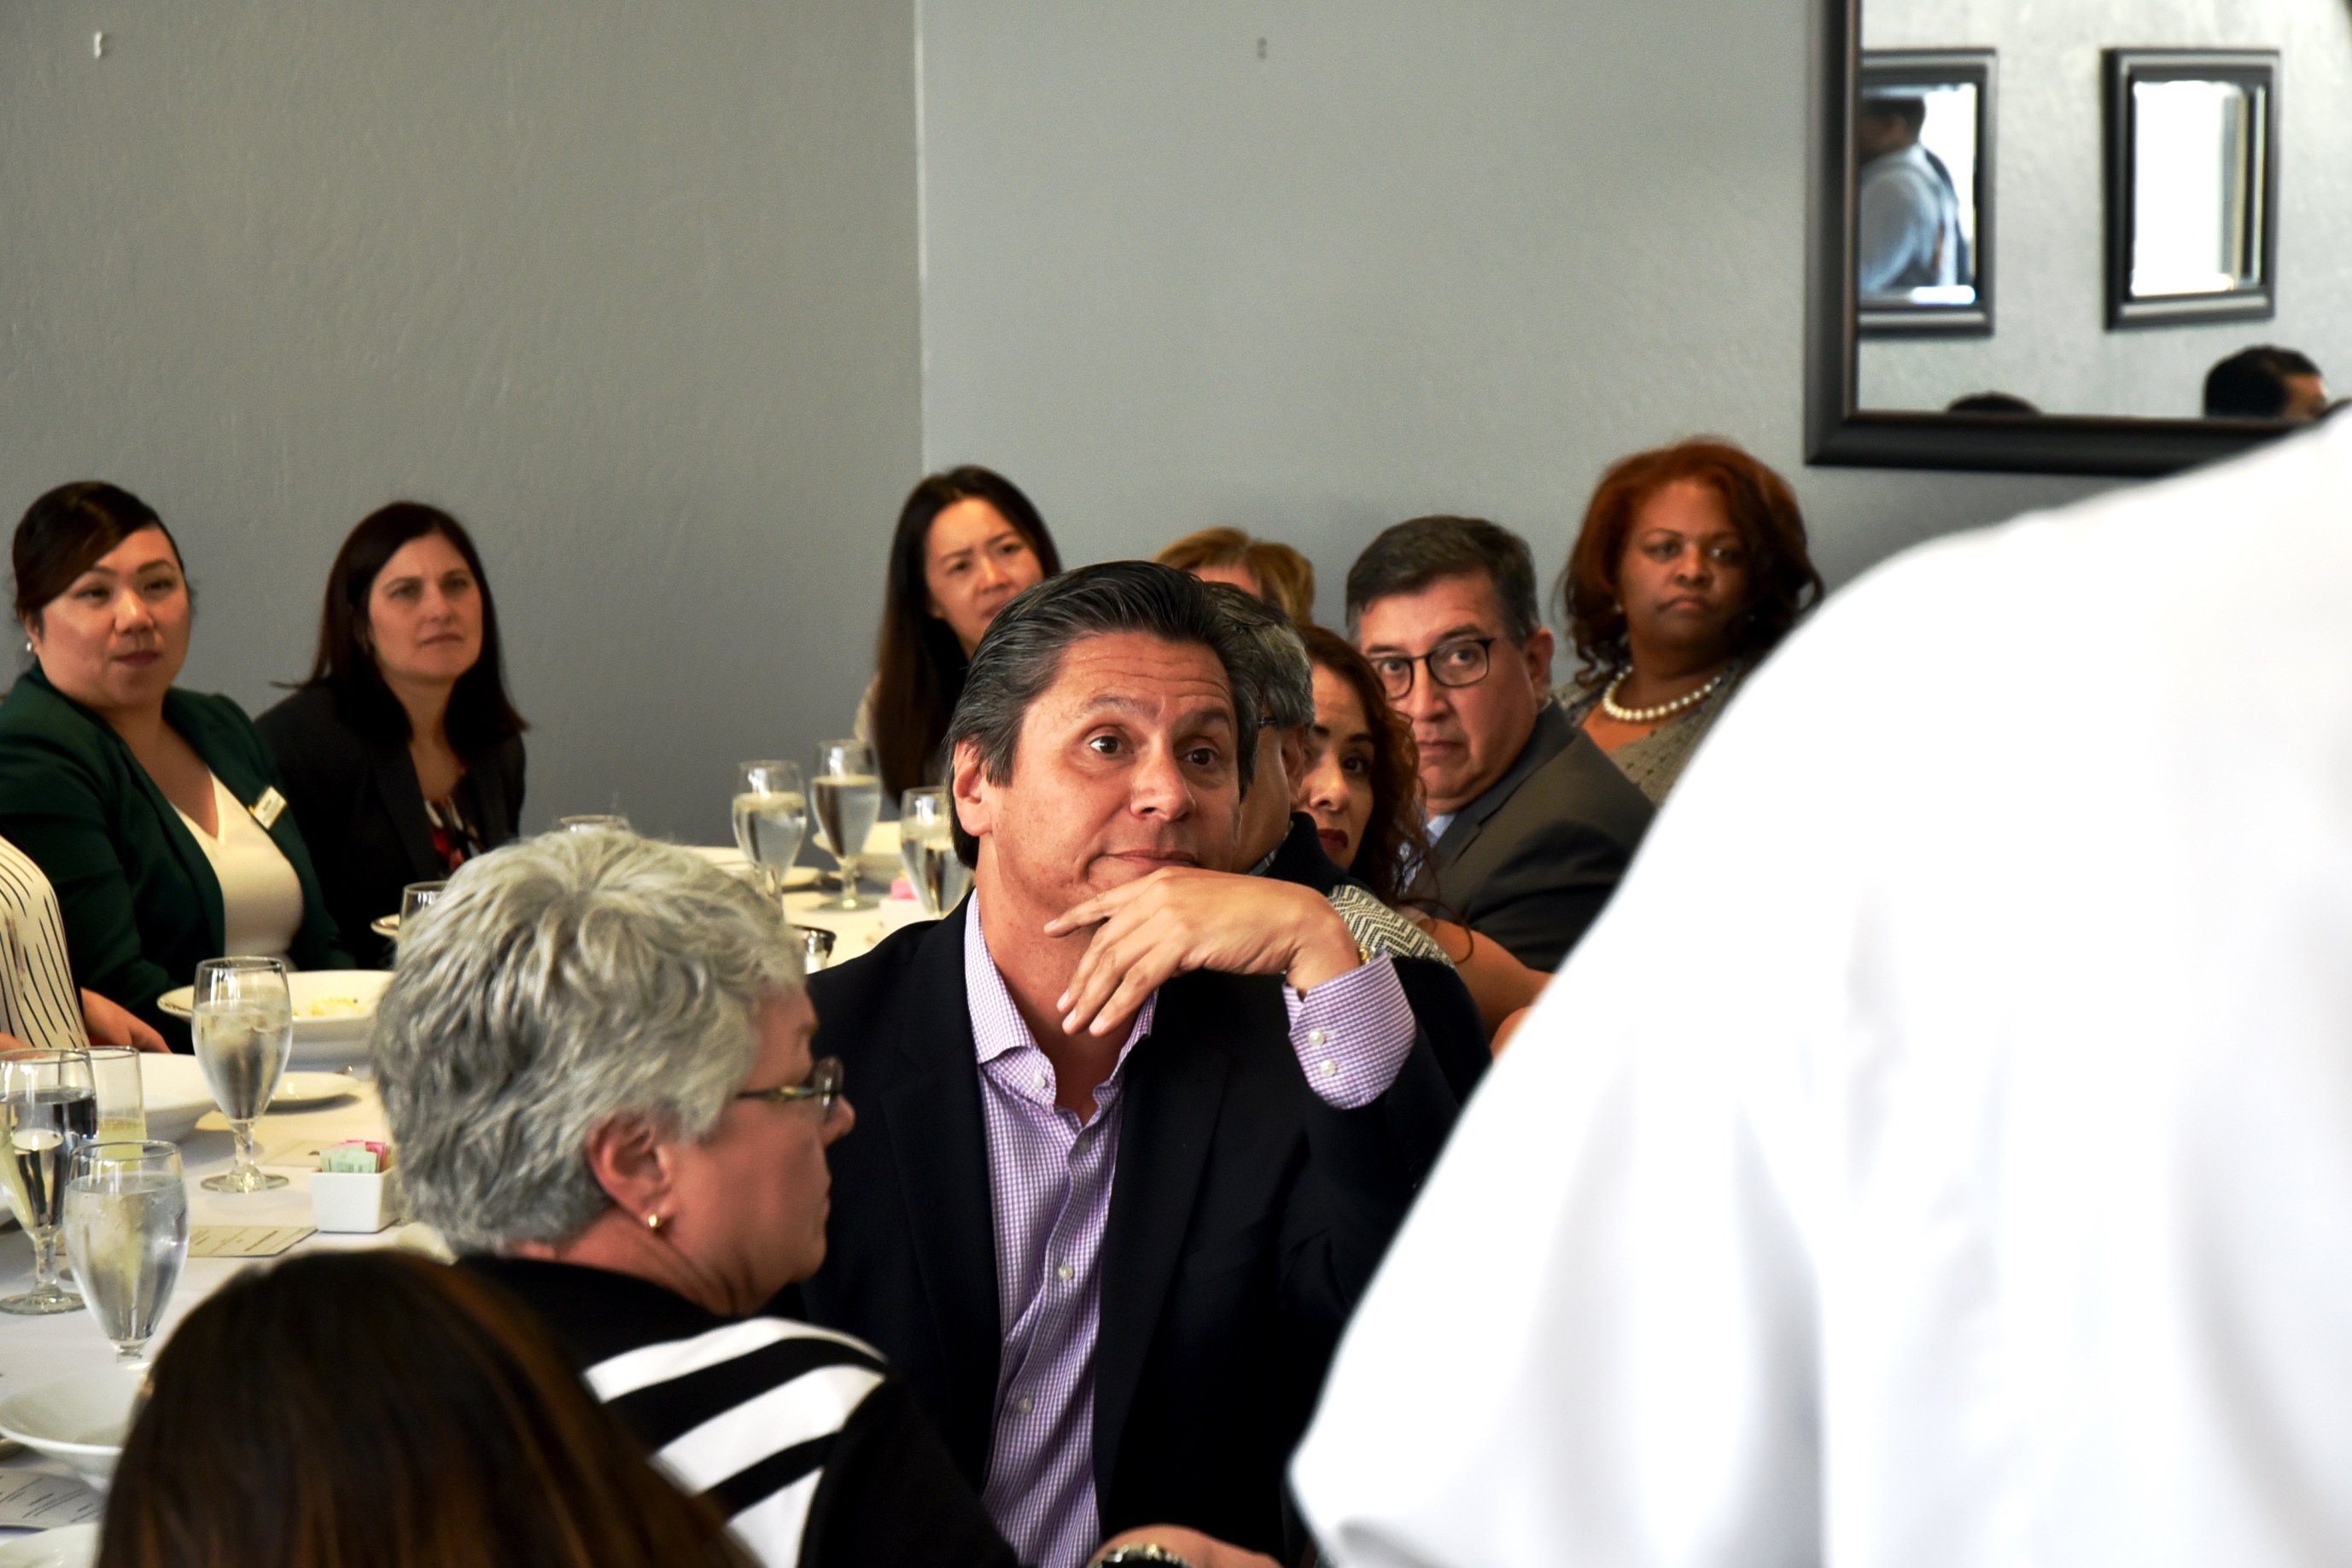 Chancellor Eloy Oakley listens to culinary arts students talk about their hopes and dreams during his visit to the Student Chef at San Joaquin Delta College.